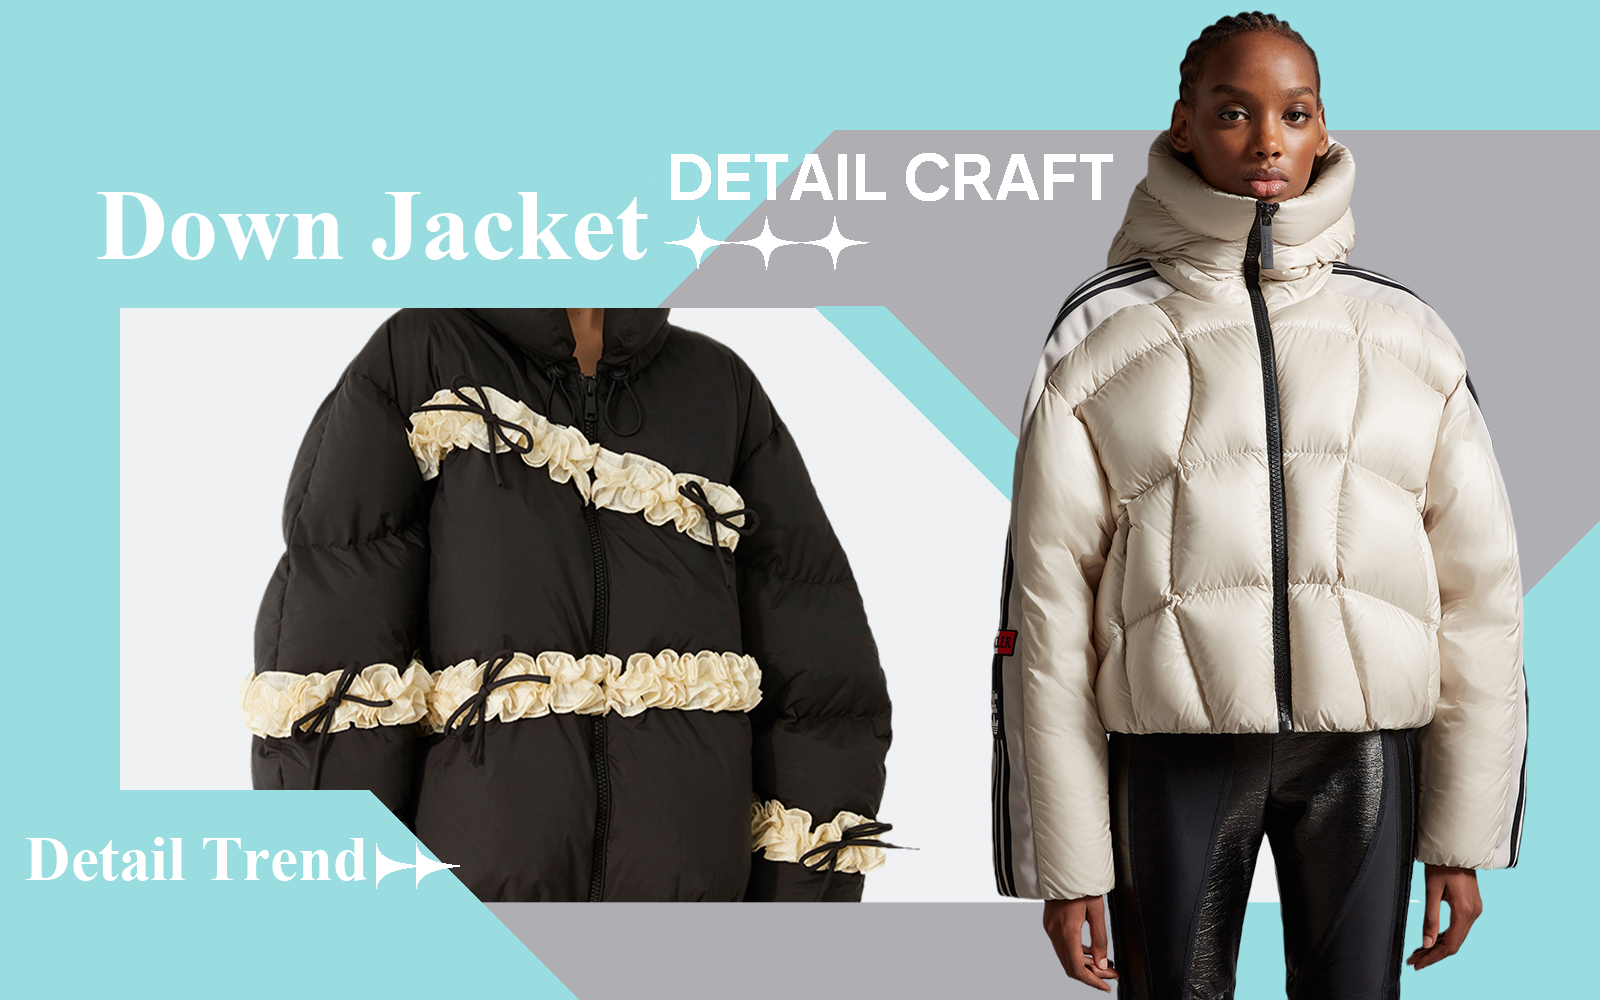 Quilting -- The Craft Trend for Down Jacket